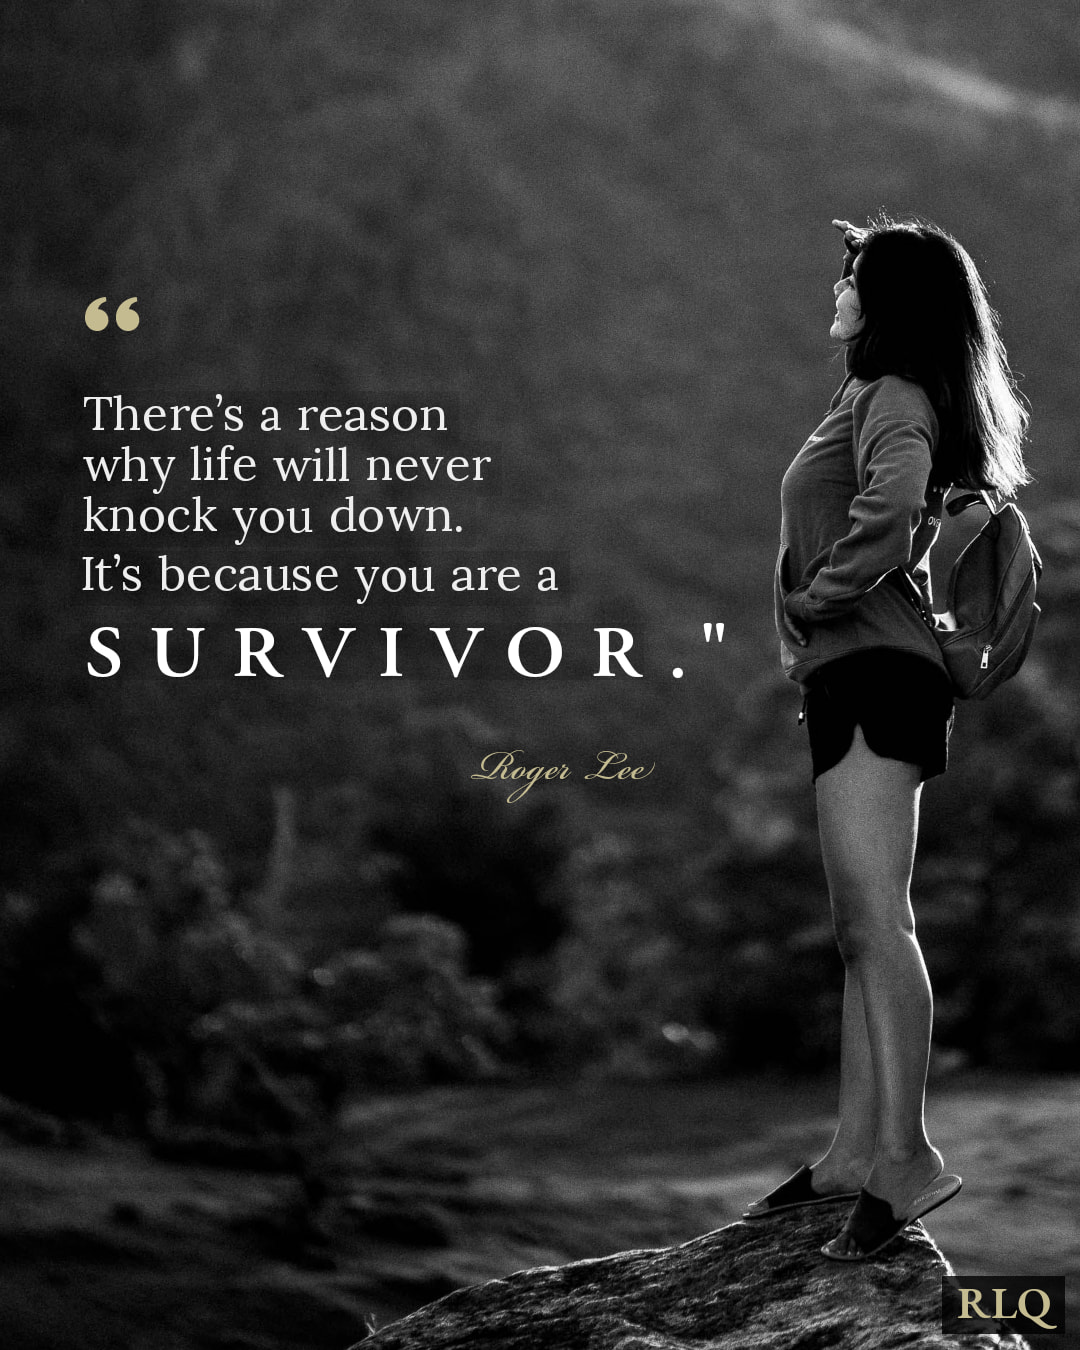 There’s a reason why life never knock you down. It’s because you are a SURVIVOR.